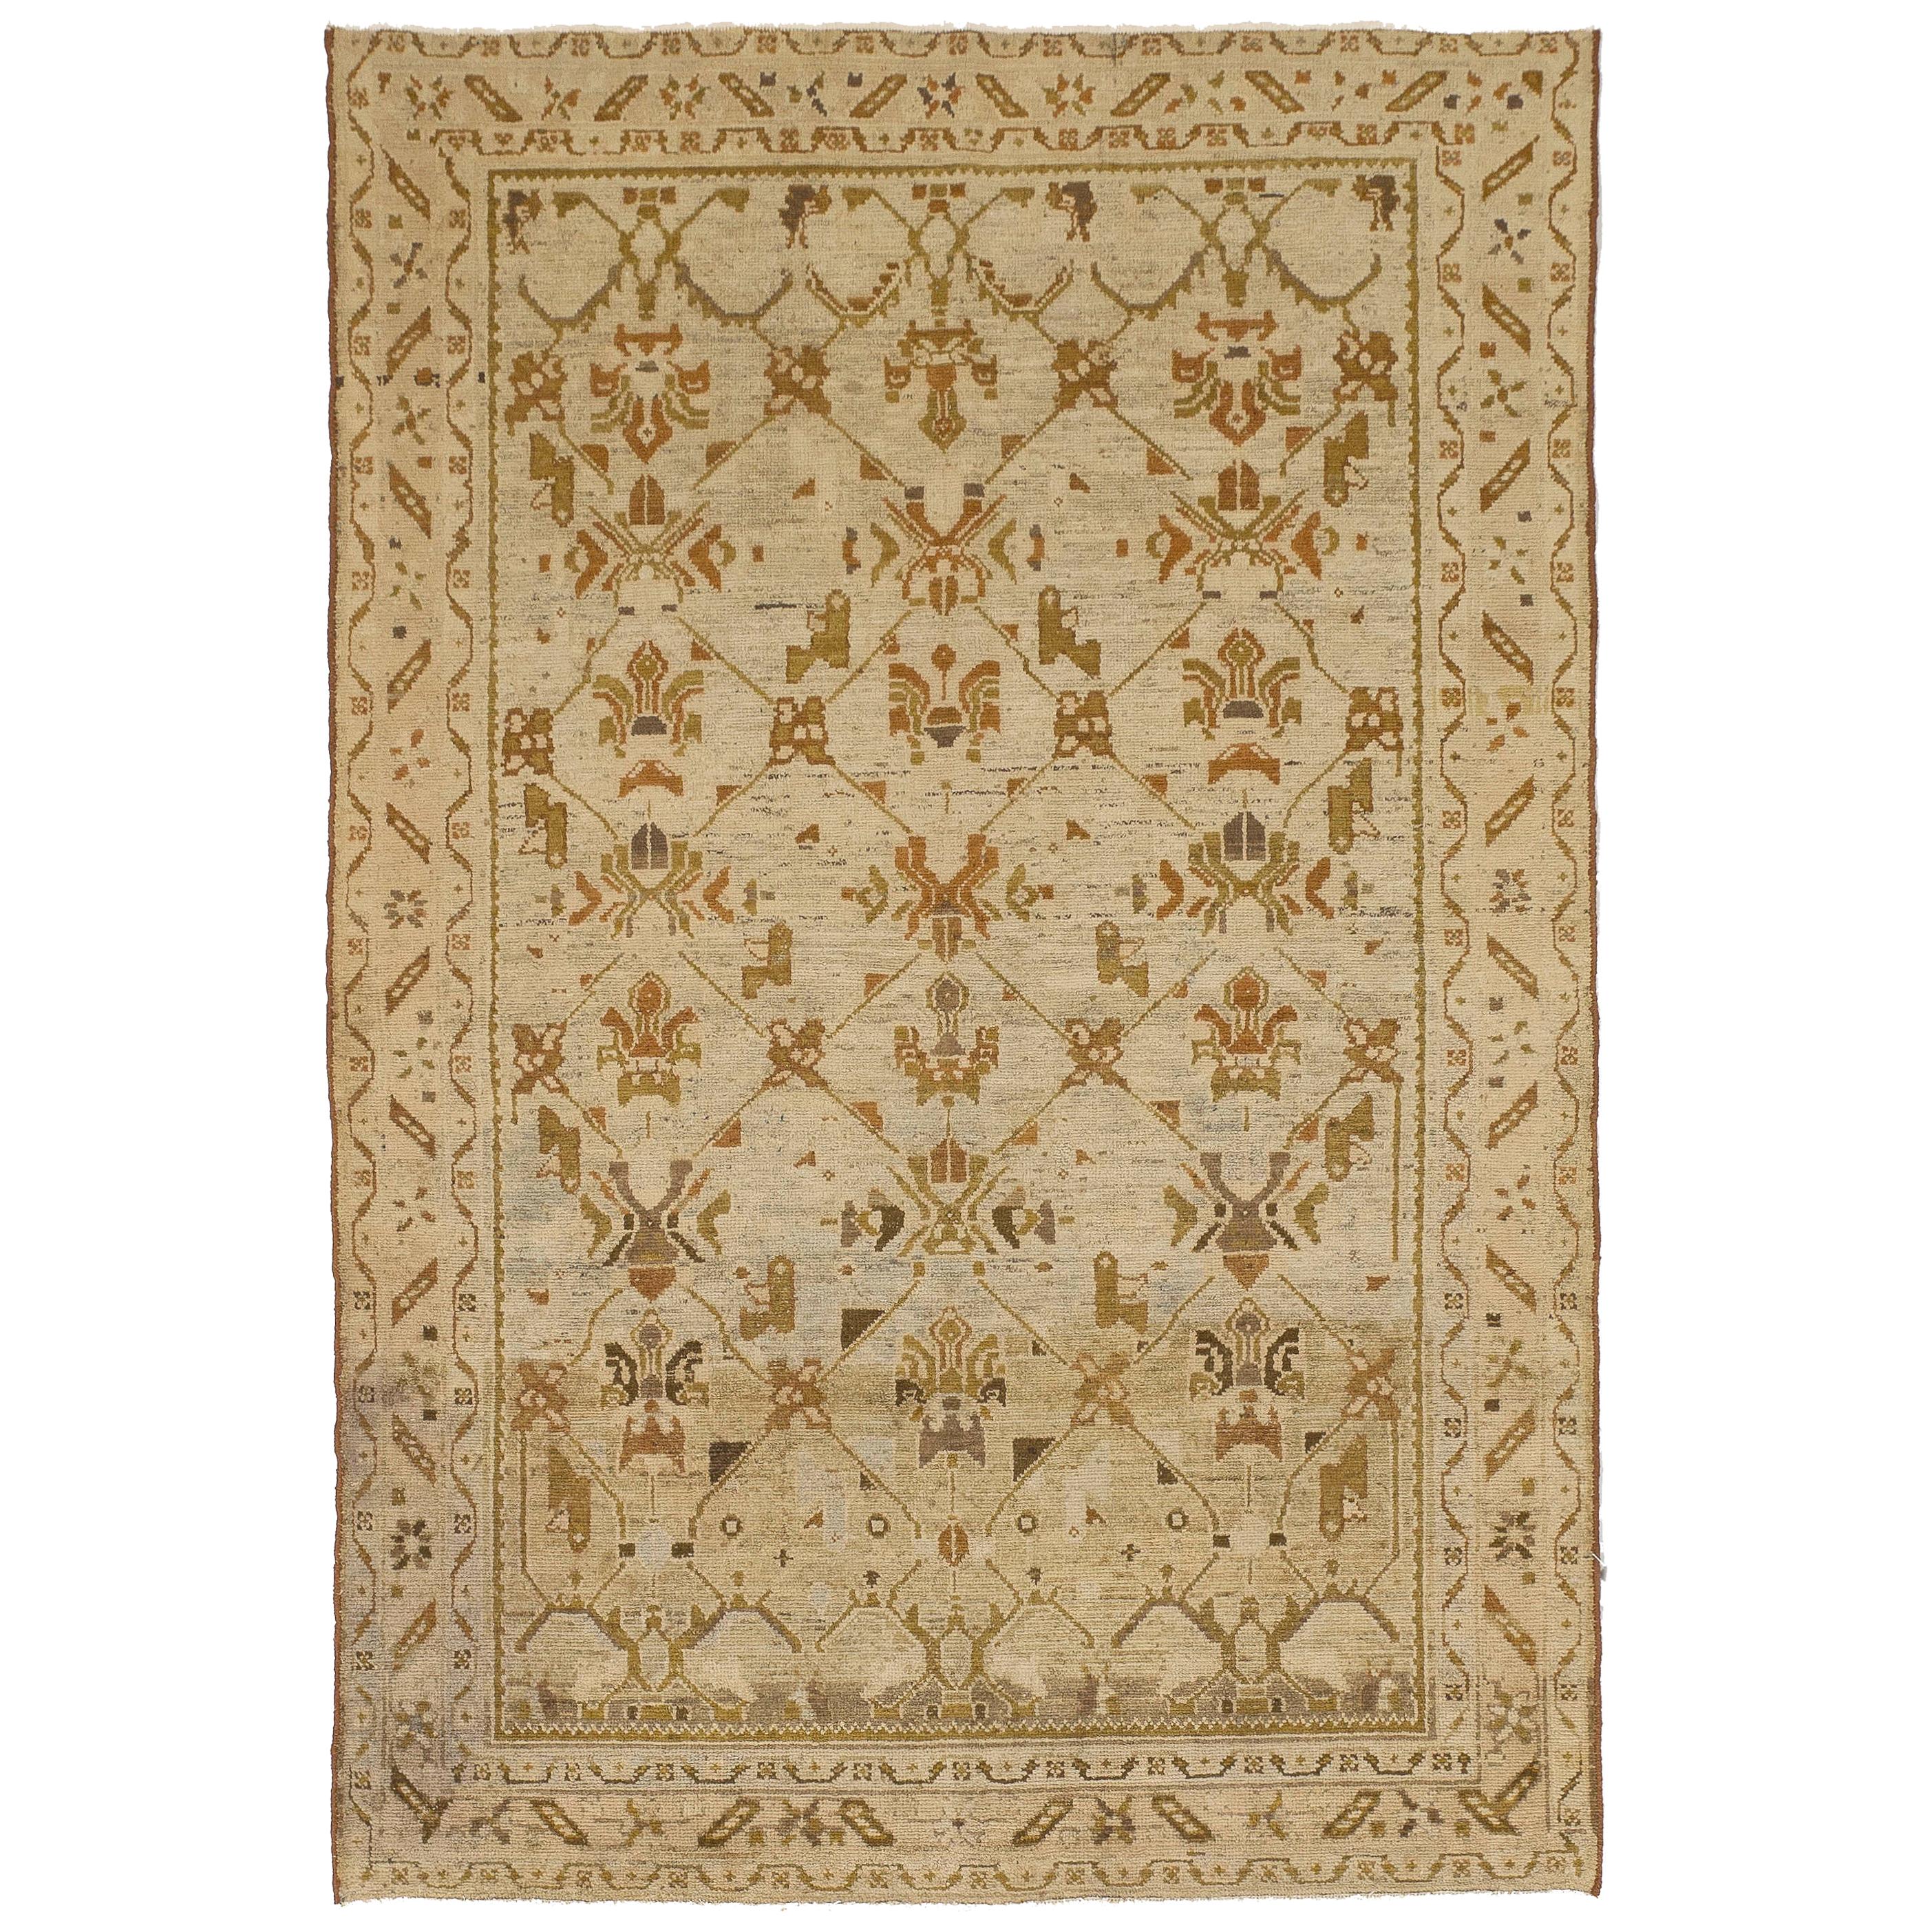 Antique Persian Malayer Rug with Green and Brown Botanical Details All-Over